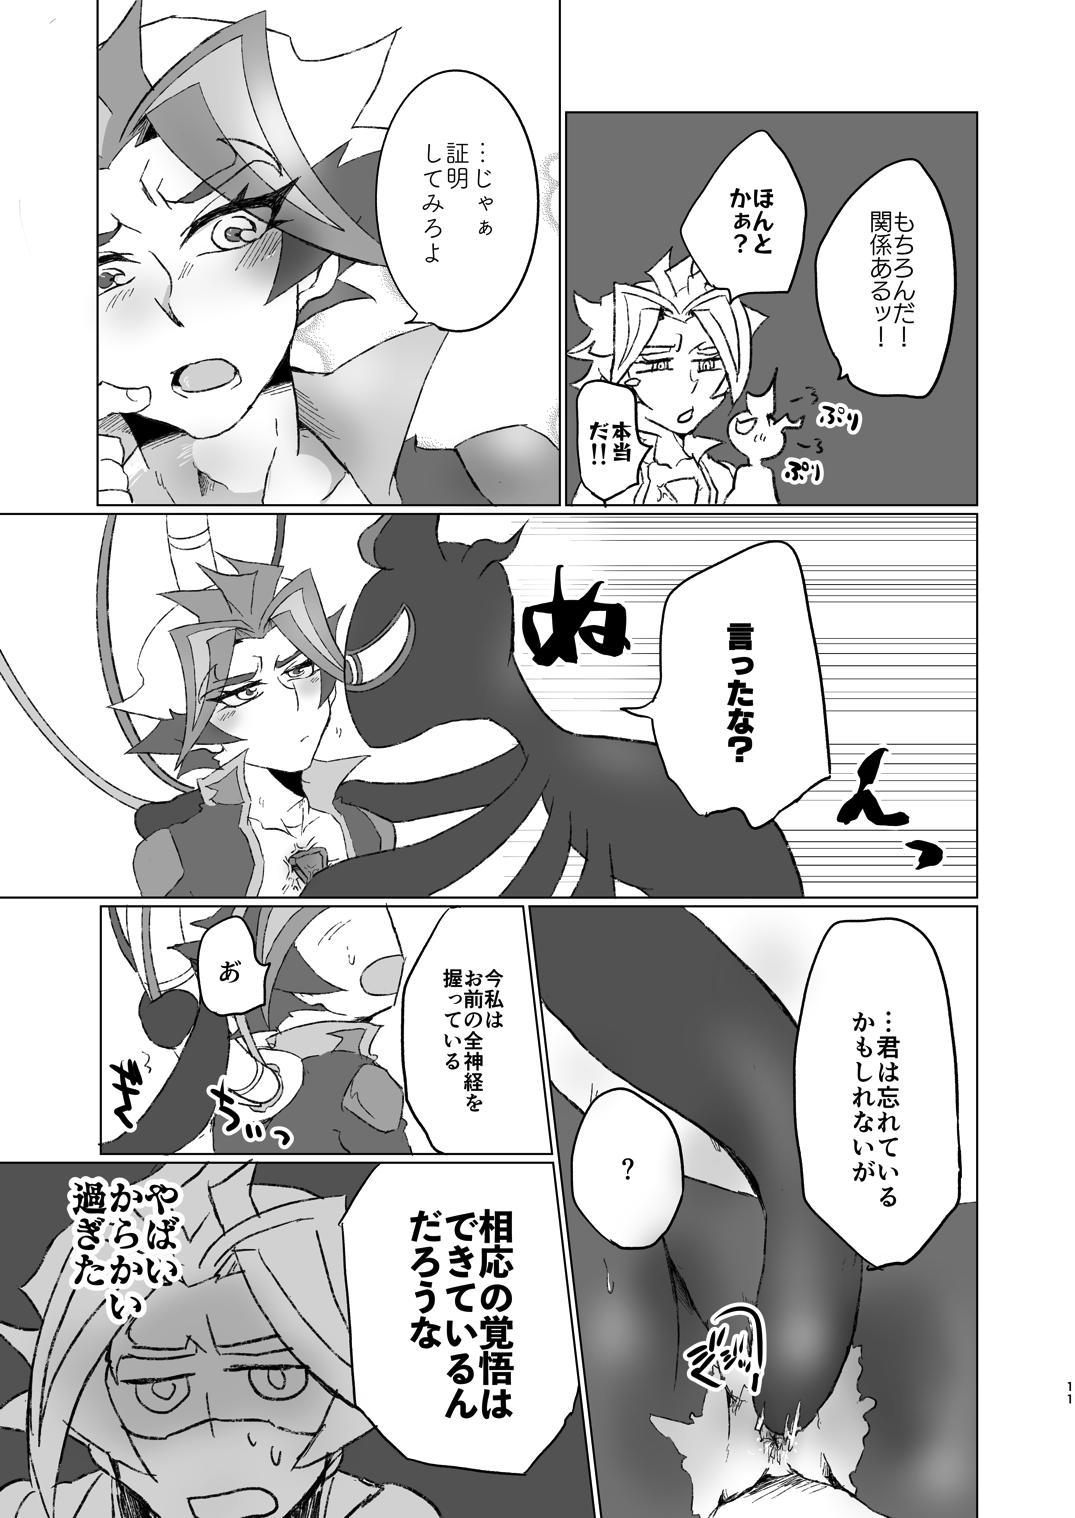 Penetration A little bit further - Yu-gi-oh vrains Hung - Page 10